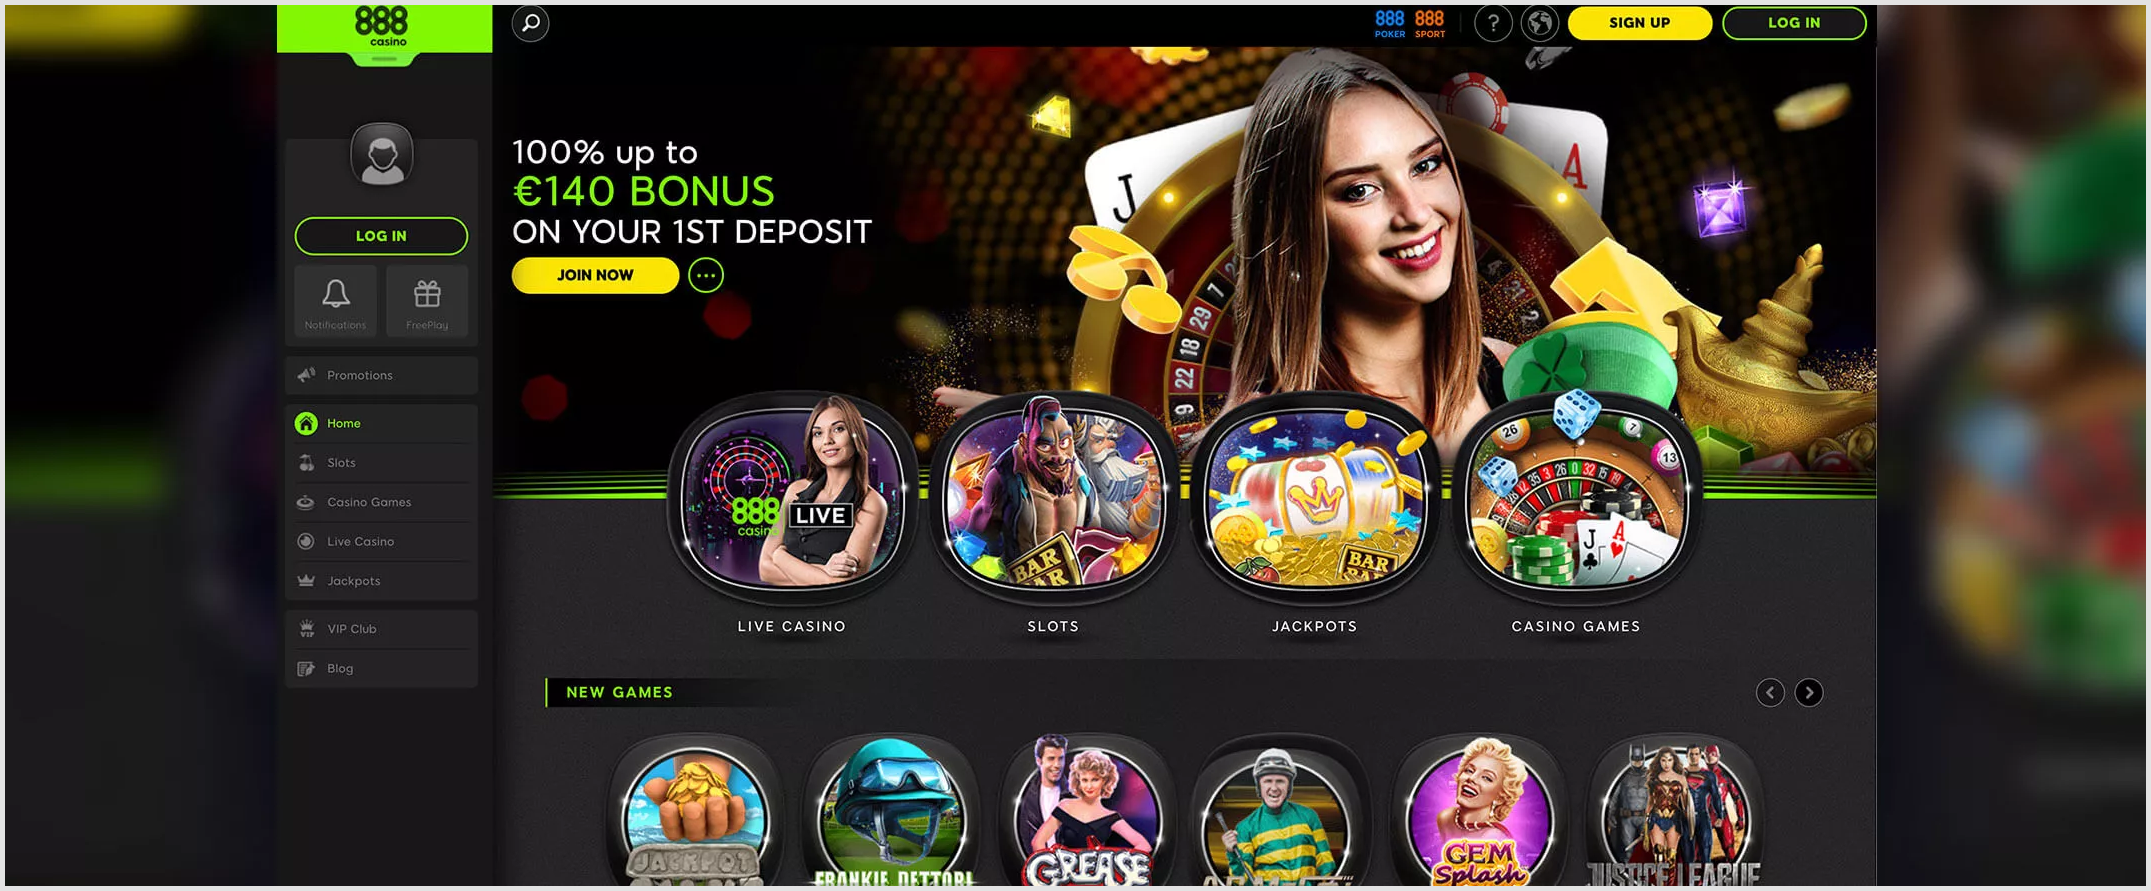 Why 888 Casino? Our Expert Review & Analysis